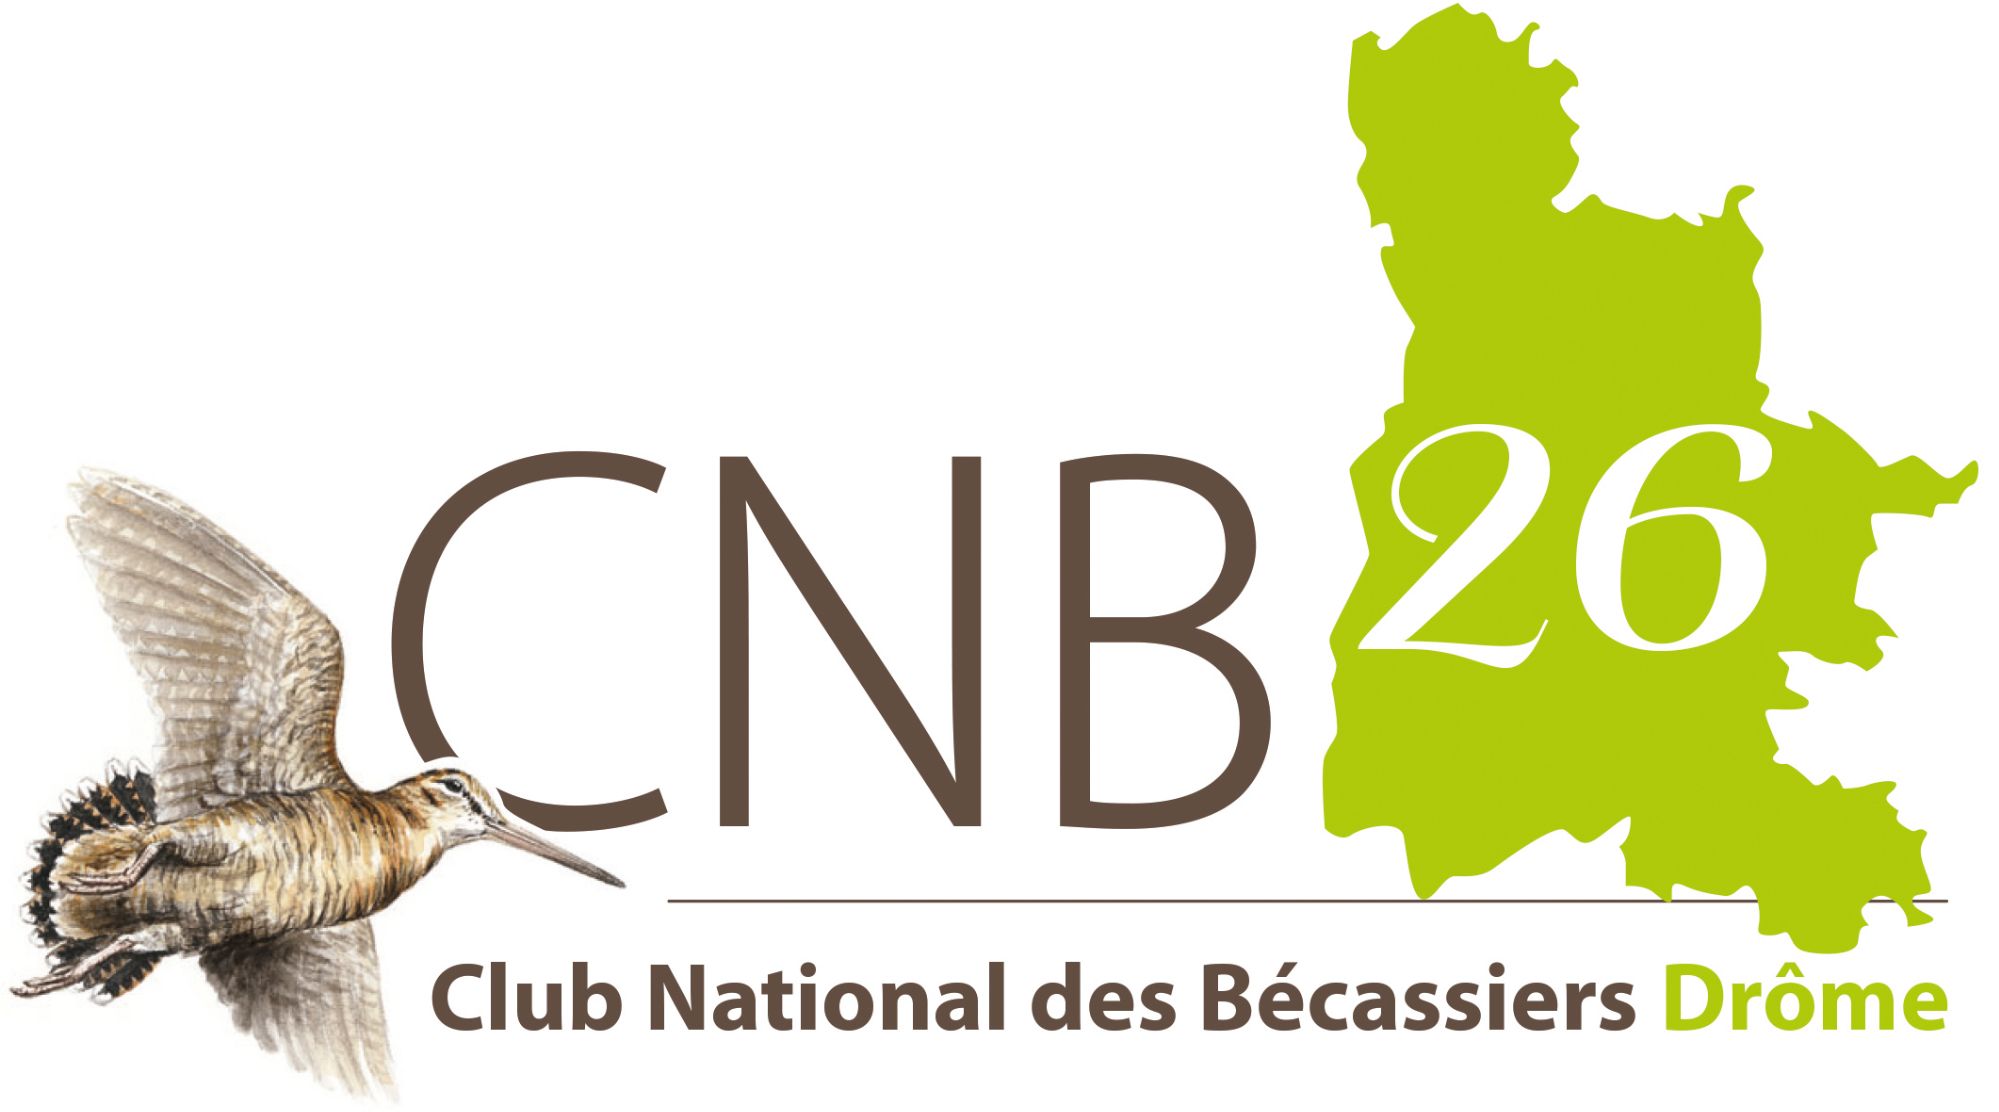 CLUB NATIONAL DES BECASSIERS